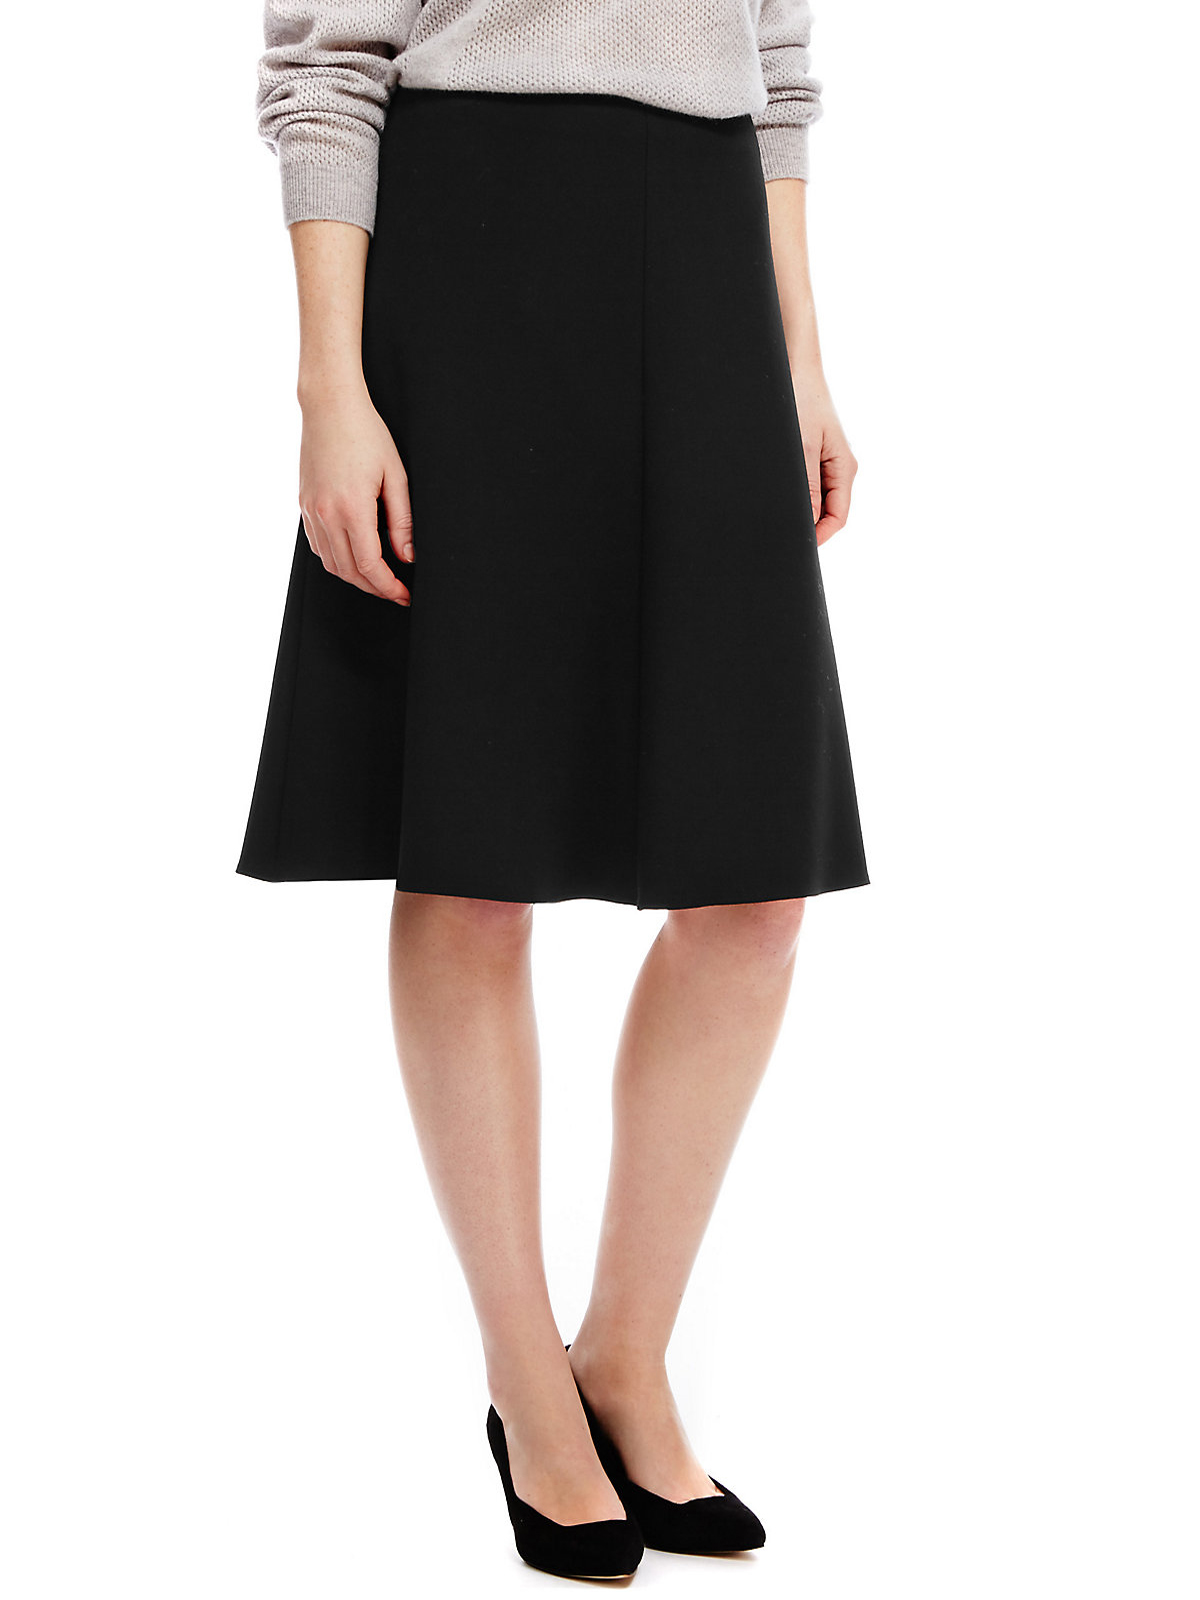 Marks and Spencer - - M&5 BLACK Assorted Ladies Skirts - 8 to 18